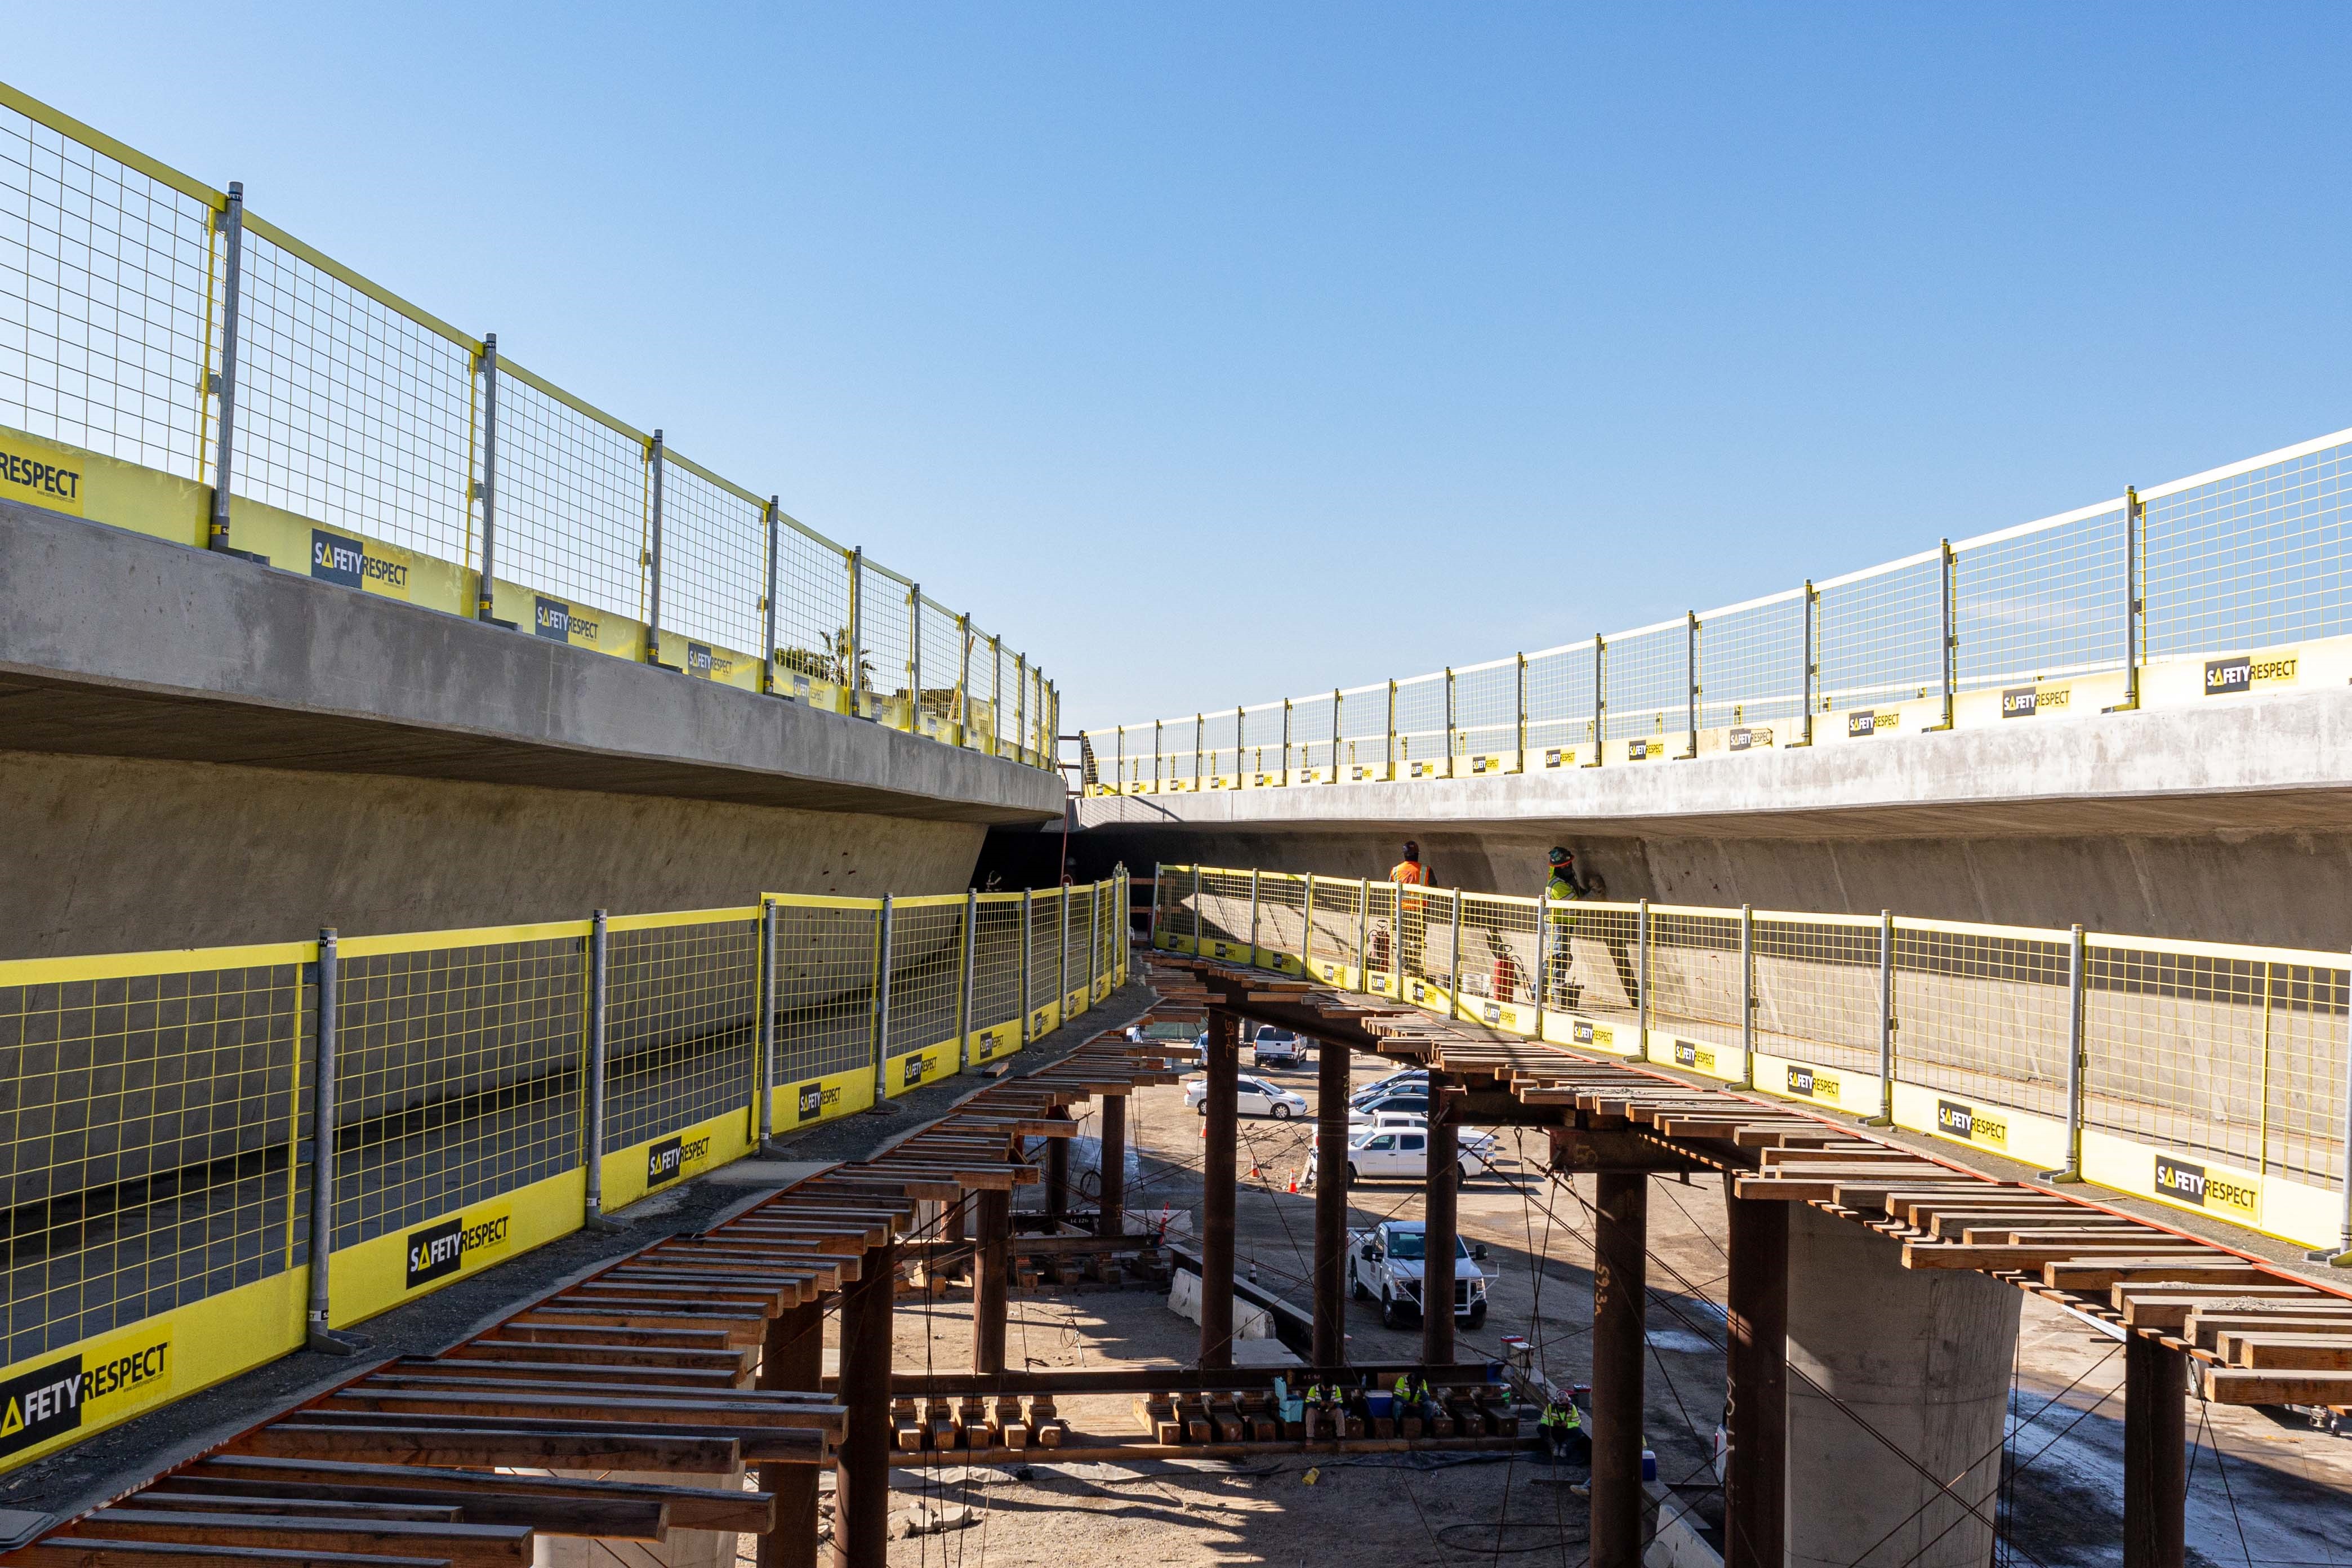 Just west of the future Intermodal Transportation Facility-West station, formwork has been stripped revealing the first segment of completed guideway superstructure.